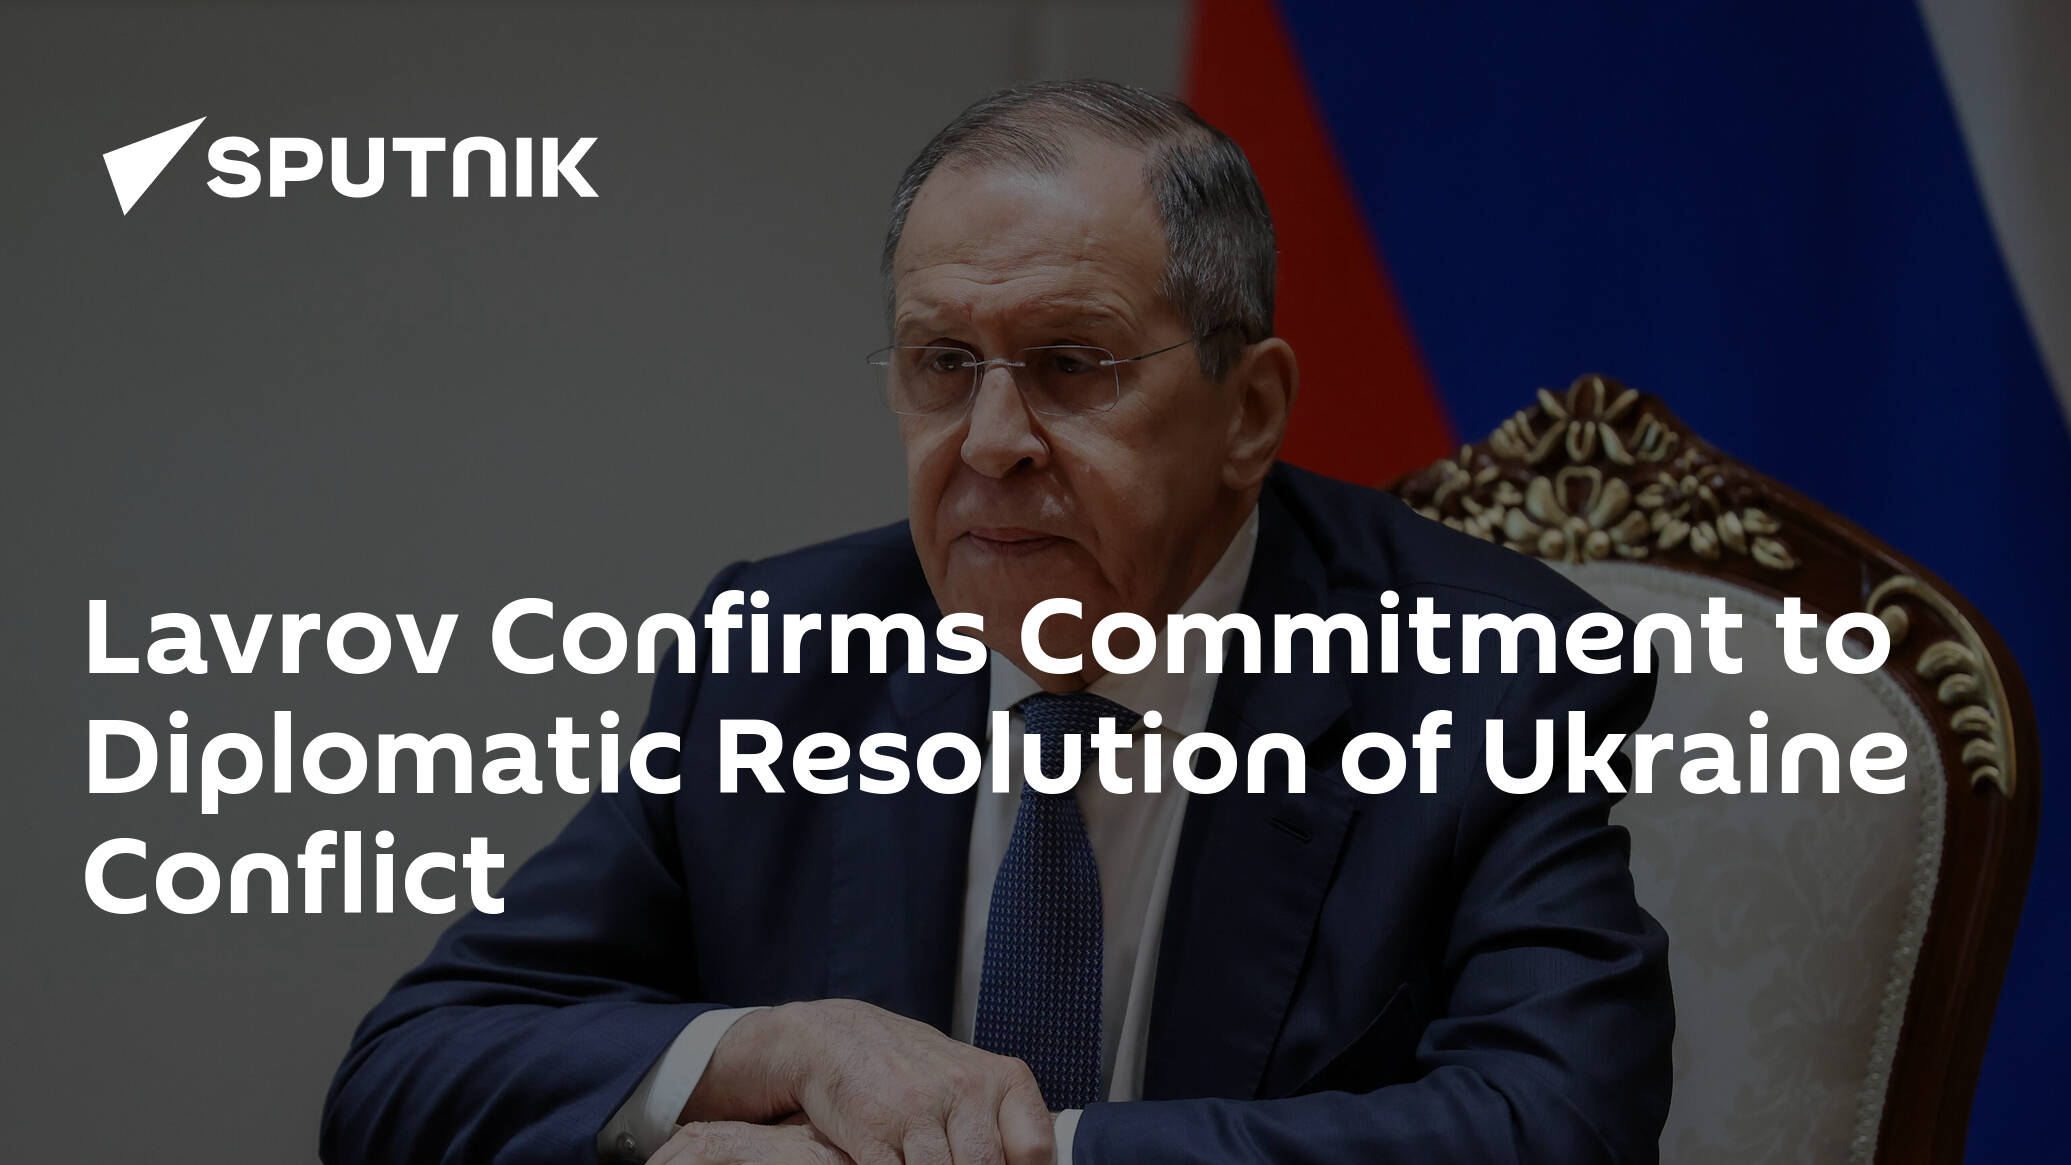 Lavrov Confirms Commitment to Diplomatic Resolution of Ukraine Conflict